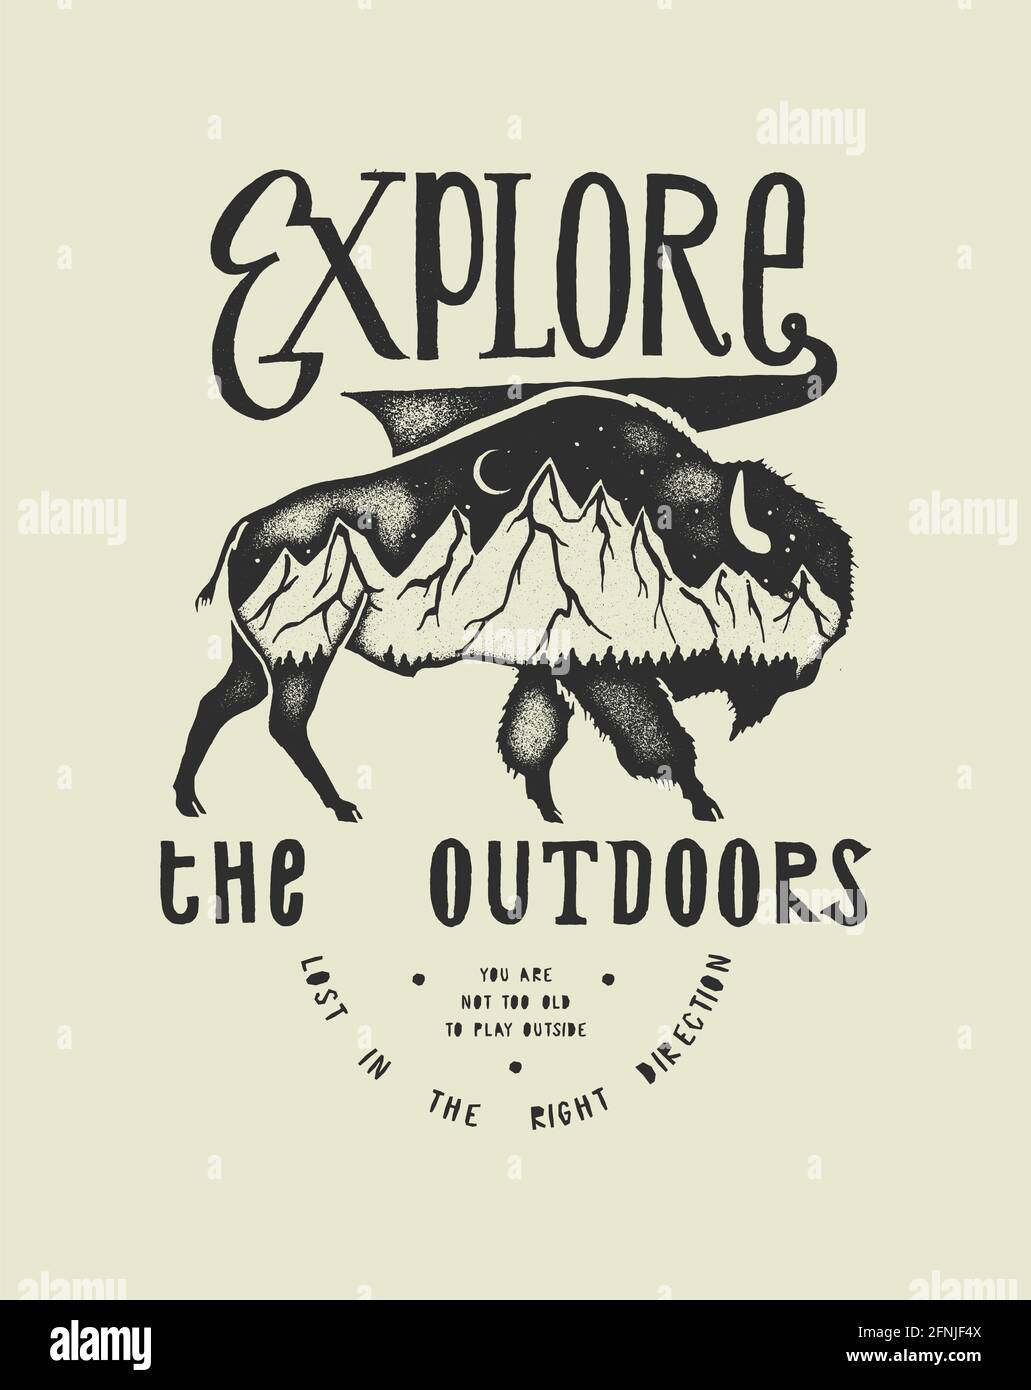 Explore the outdoors - vintage hiking print with american bison and mountains - t-shirt design Stock Vector